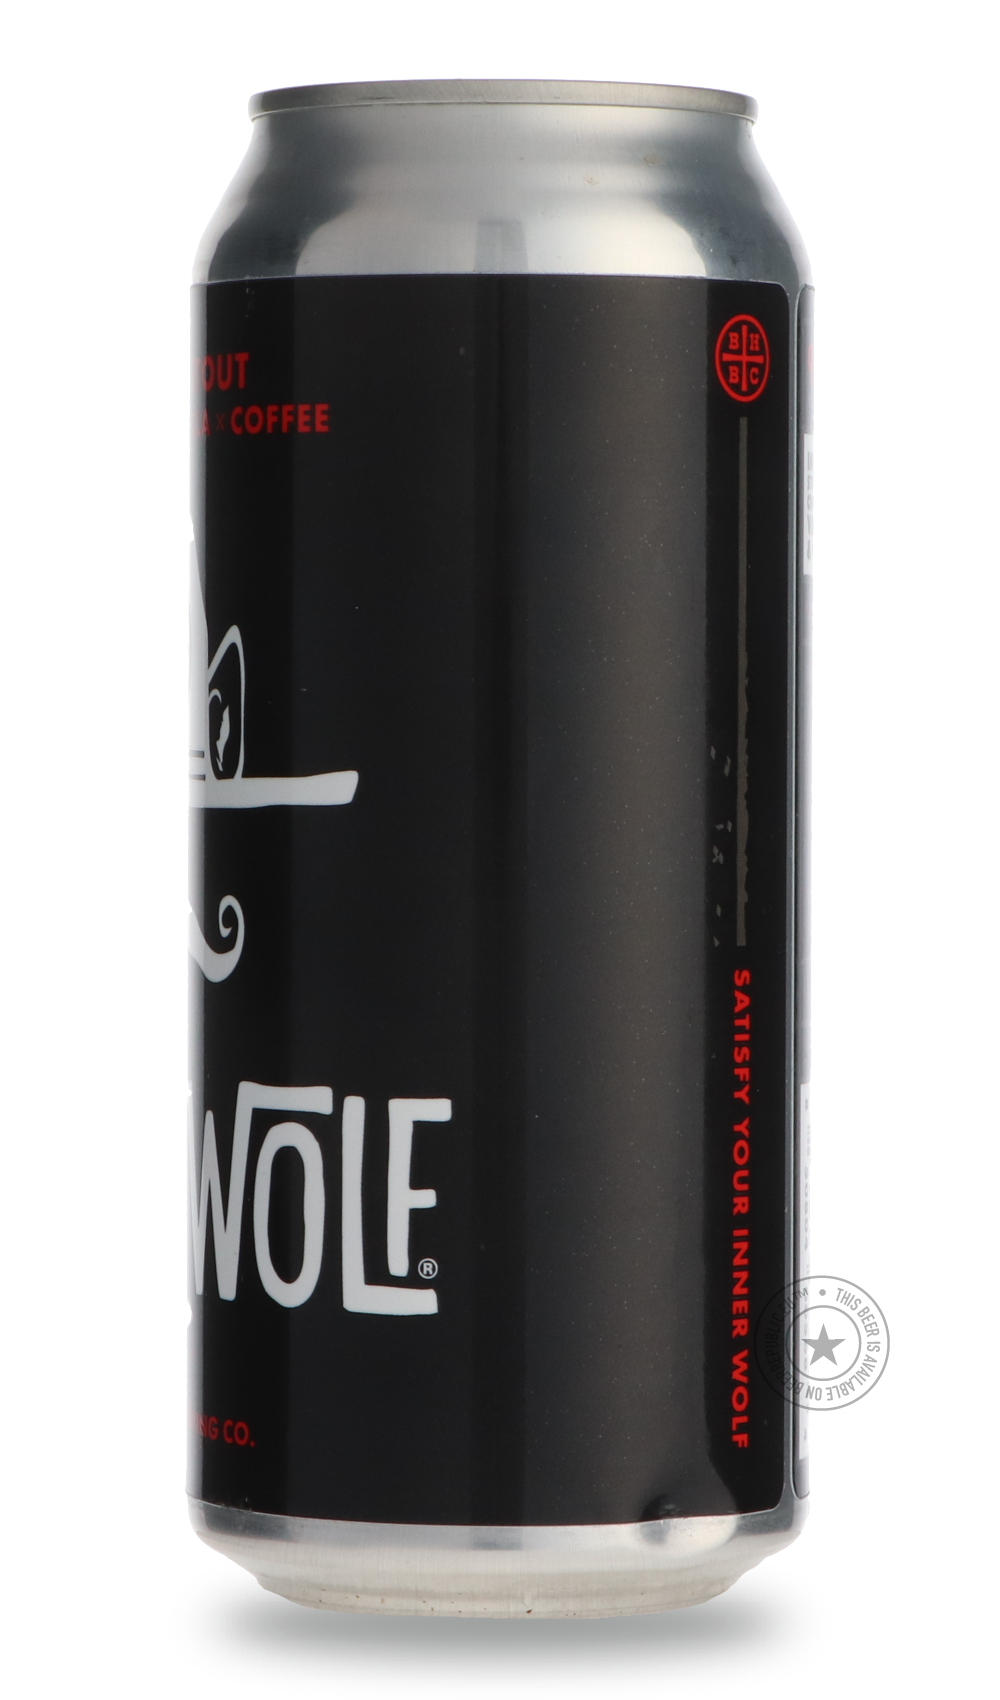 -BarrelHouse- Curly Wolf 2022-Stout & Porter- Only @ Beer Republic - The best online beer store for American & Canadian craft beer - Buy beer online from the USA and Canada - Bier online kopen - Amerikaans bier kopen - Craft beer store - Craft beer kopen - Amerikanisch bier kaufen - Bier online kaufen - Acheter biere online - IPA - Stout - Porter - New England IPA - Hazy IPA - Imperial Stout - Barrel Aged - Barrel Aged Imperial Stout - Brown - Dark beer - Blond - Blonde - Pilsner - Lager - Wheat - Weizen - 